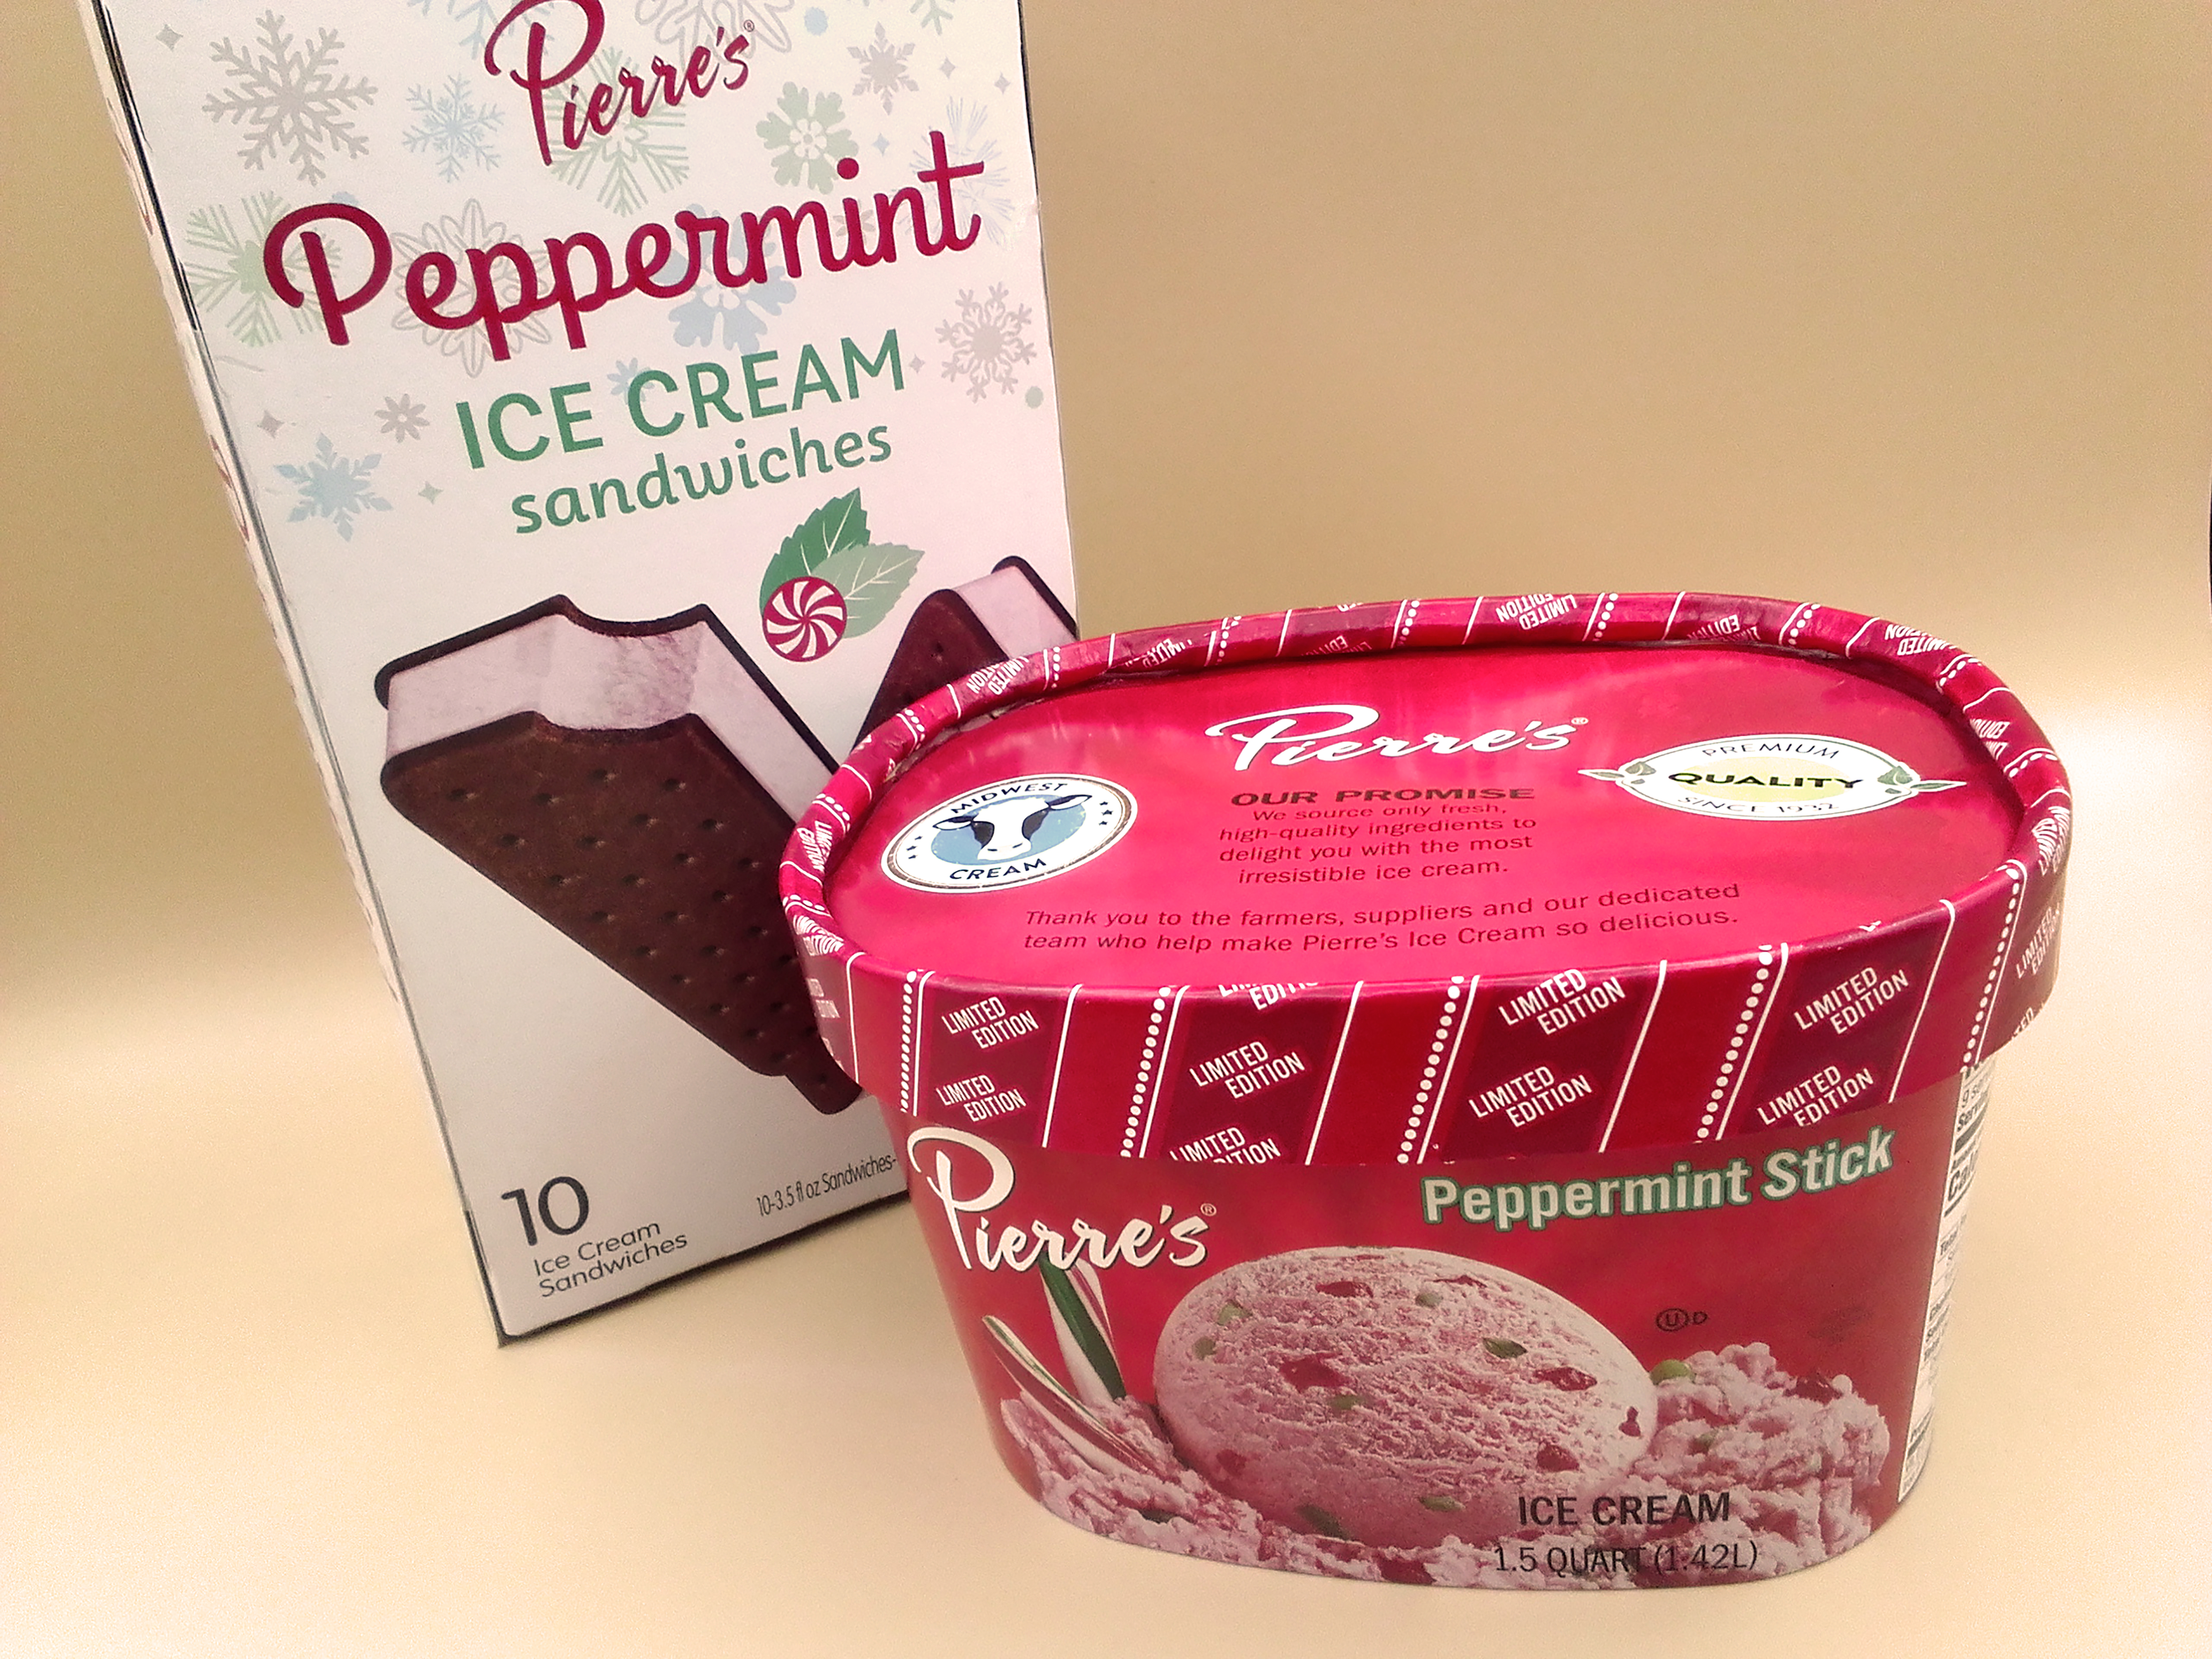 Peppermint Stick Icecream: Irresistibly Refreshing and Exquisite